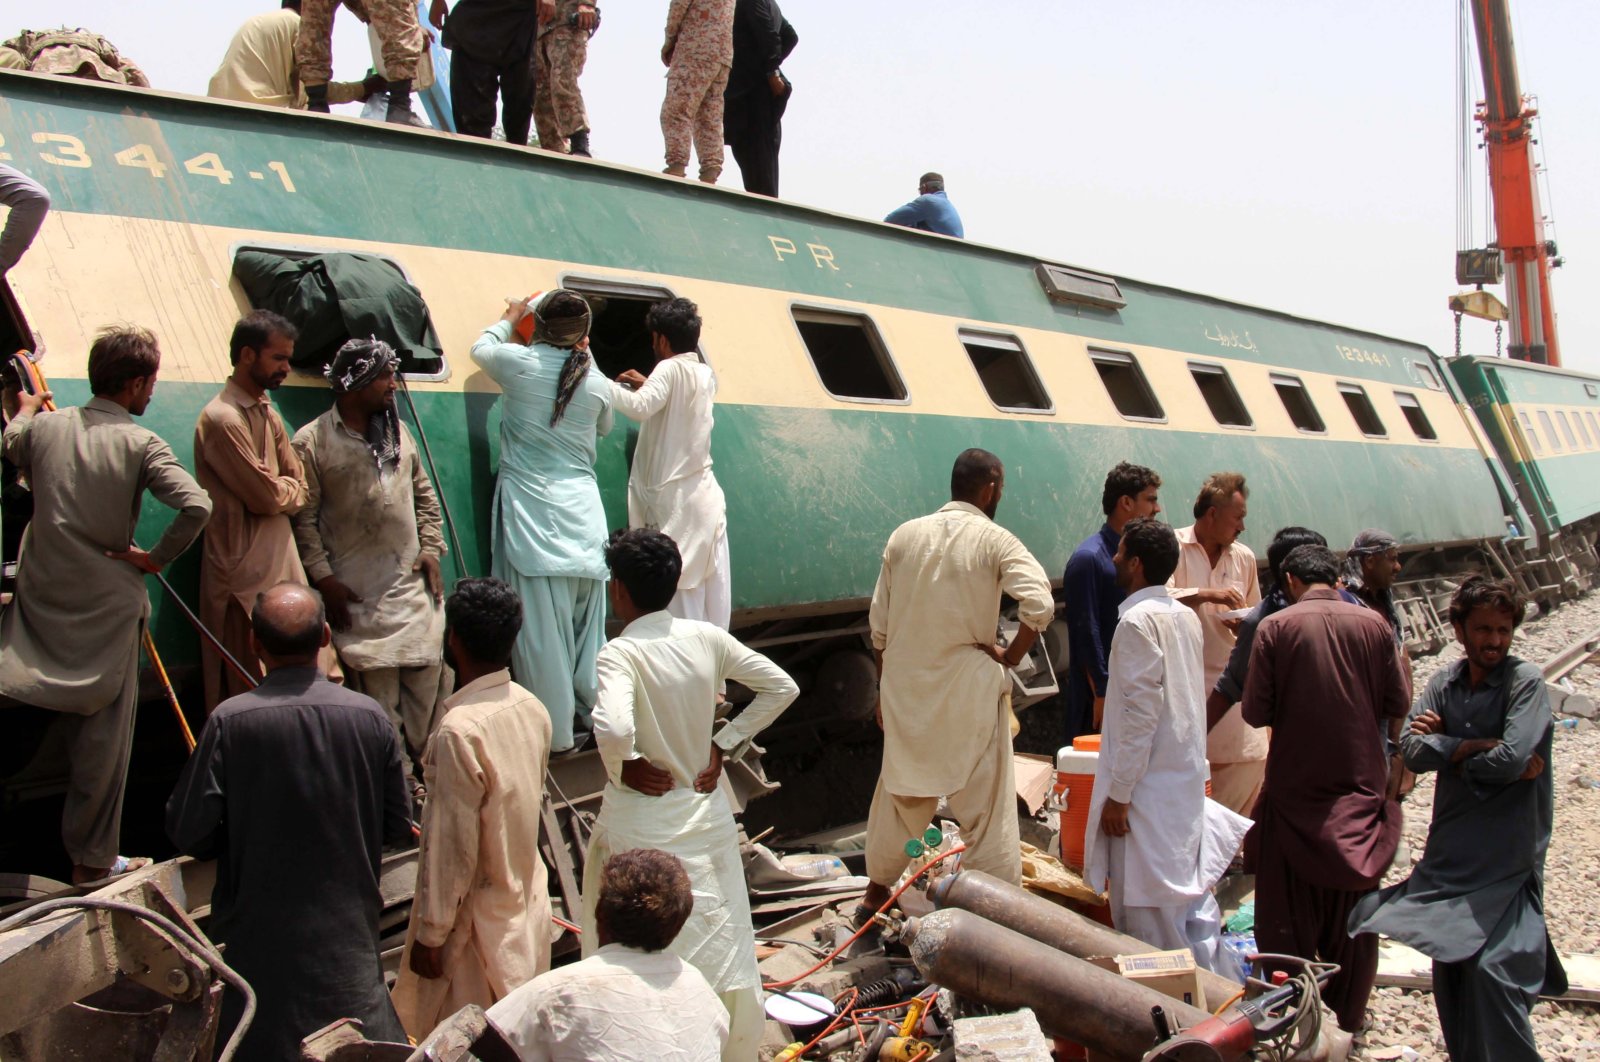 Rescue workers assess the scene following a train accident in Dharki, Sindh province, Pakistan, June 7, 2021. (EPA Photo)